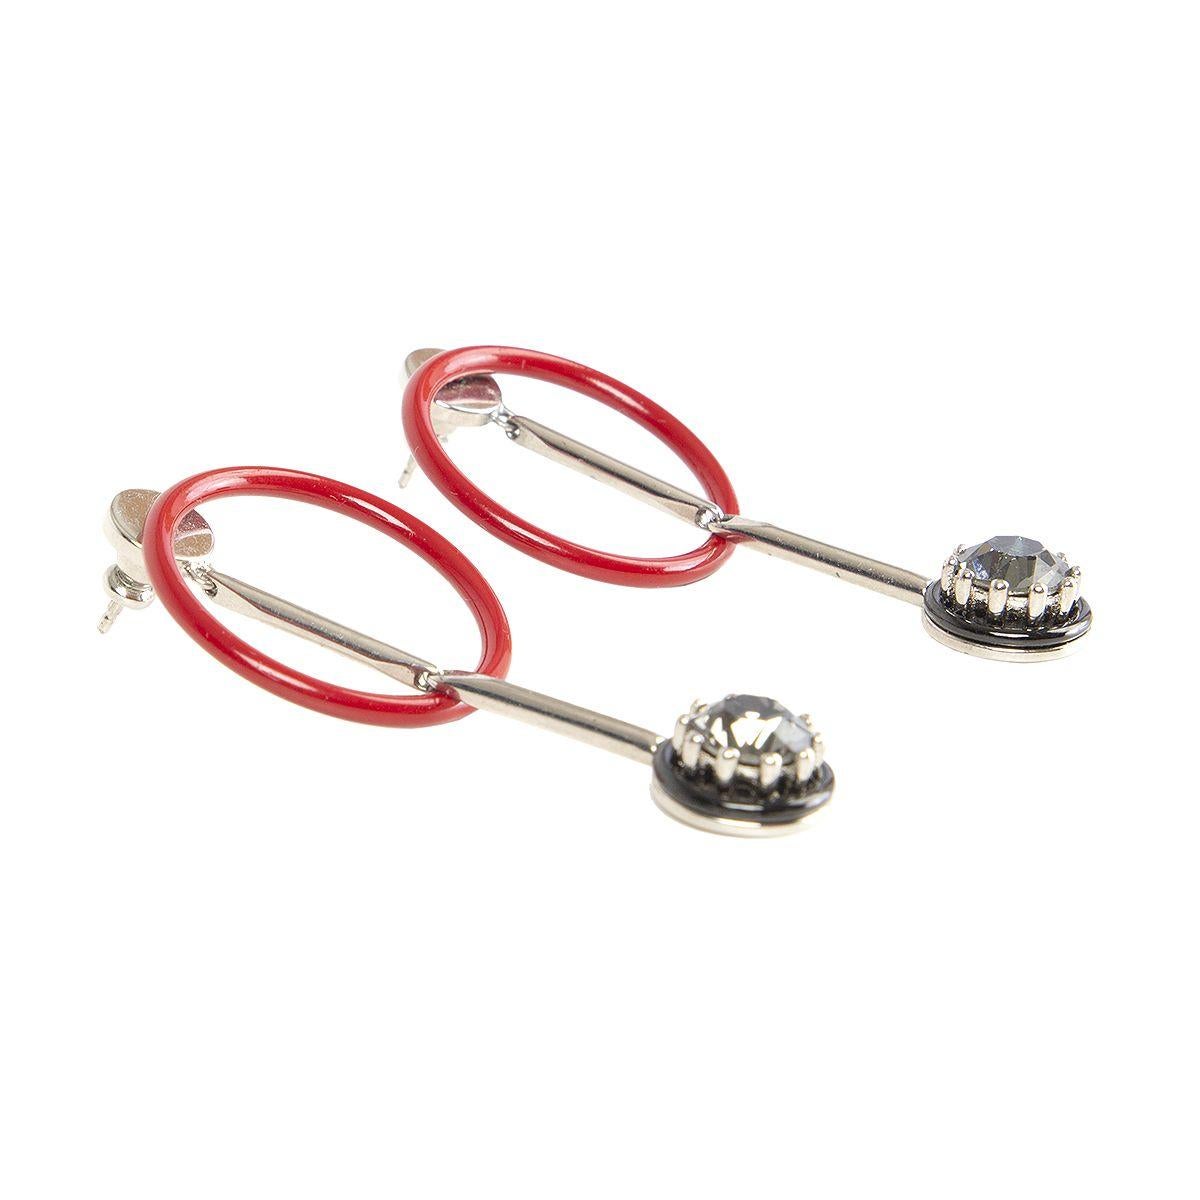 Christian Dior red metal hoop earrings with crystal embellished silver-tone metal bar. Has been worn and is in excellent condition. 

Width 2.5cm (1in)
Height 2.5cm (1in)
Length 5cm (2in)
Hardware Silver-Tone Metal